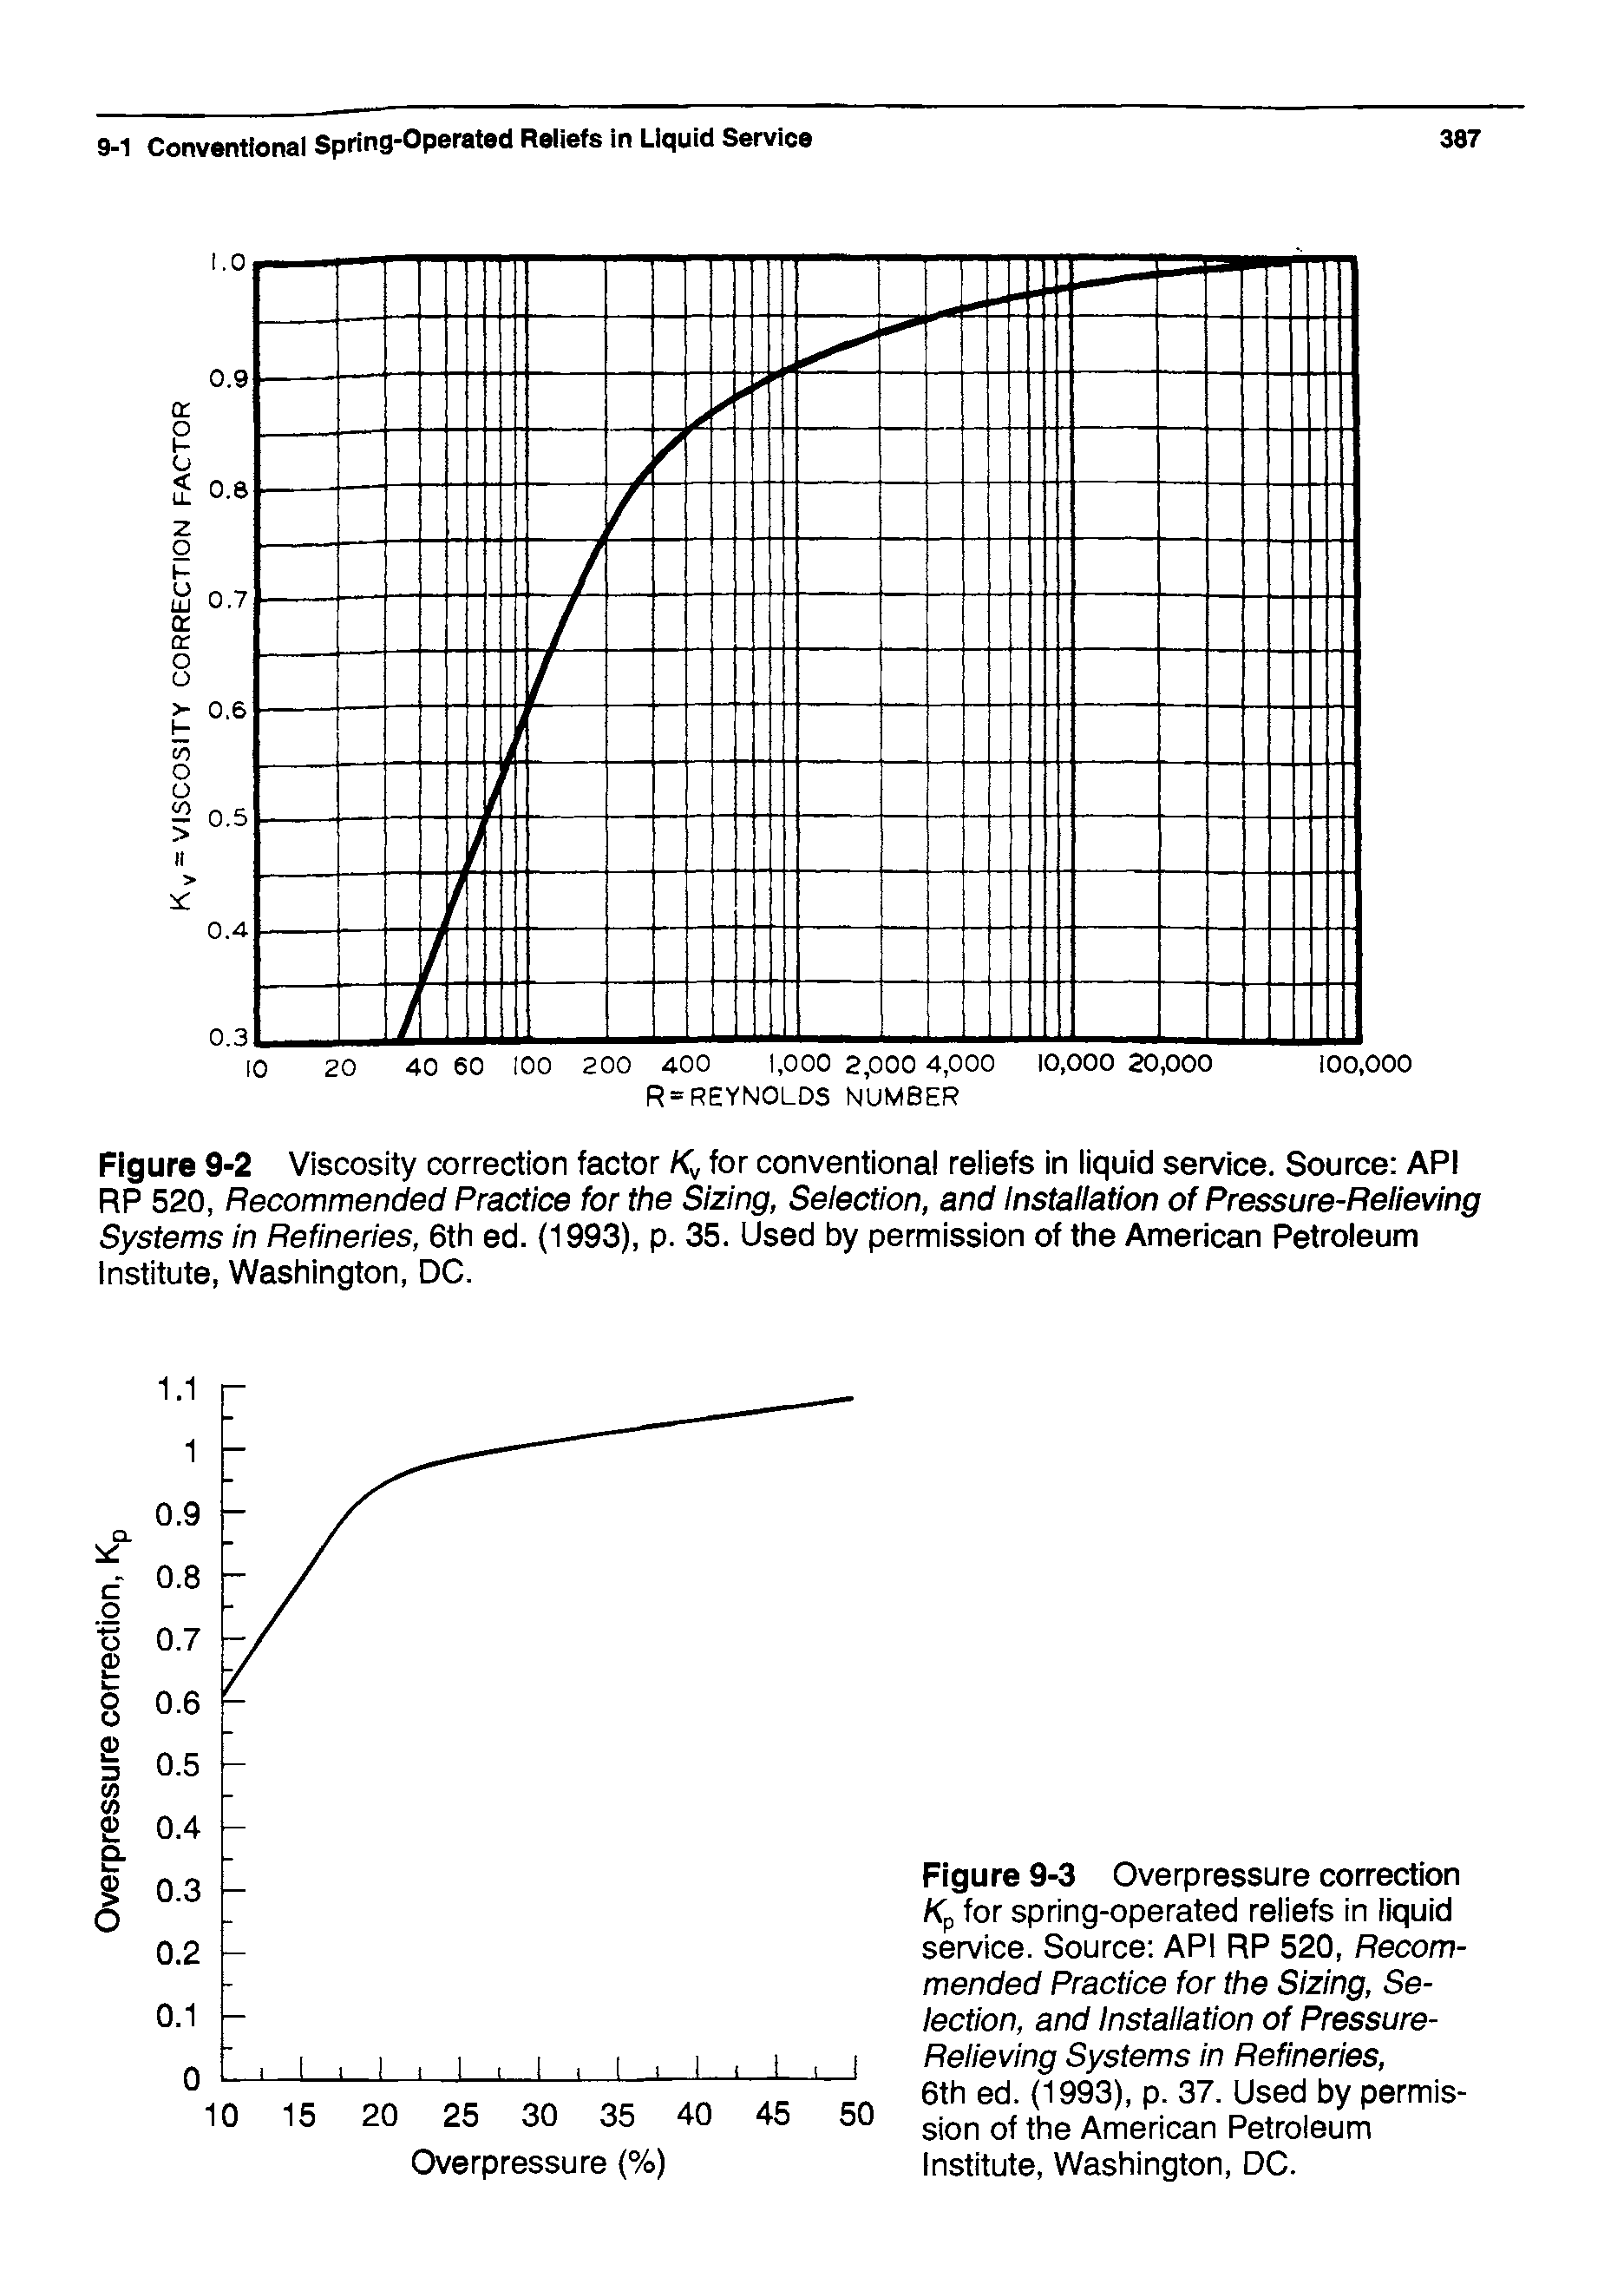 Figure 9-2 Viscosity correction factor Kv for conventional reliefs in liquid service. Source API RP 520, Recommended Practice for the Sizing, Selection, and Installation of Pressure-Relieving Systems in Refineries, 6th ed. (1993), p. 35. Used by permission of the American Petroleum Institute, Washington, DC.